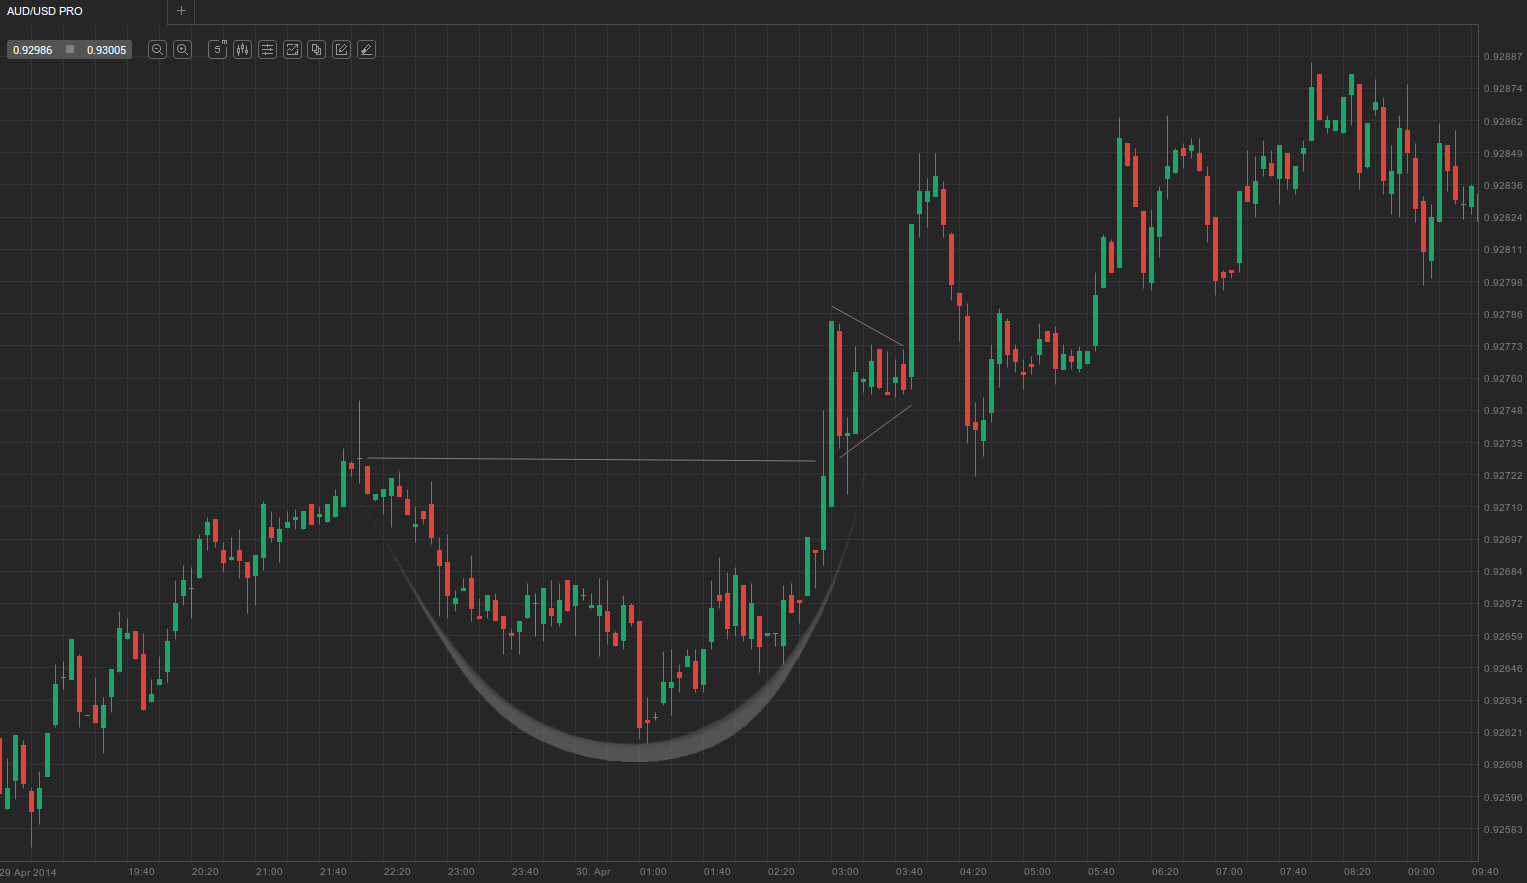 1. Cup and handle